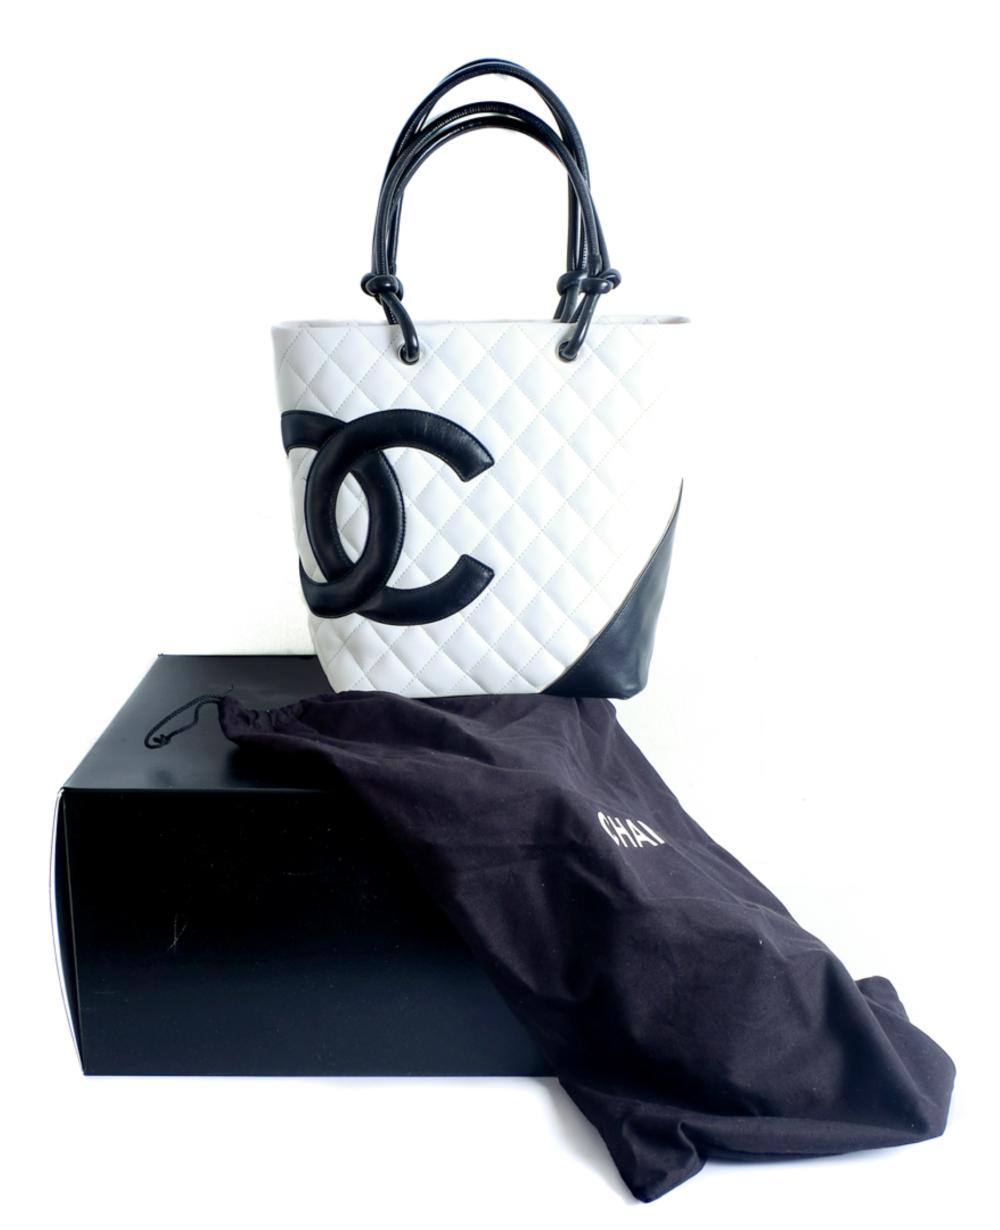 CHANEL PETITE SHOPPING TOTE IN 2d48a5